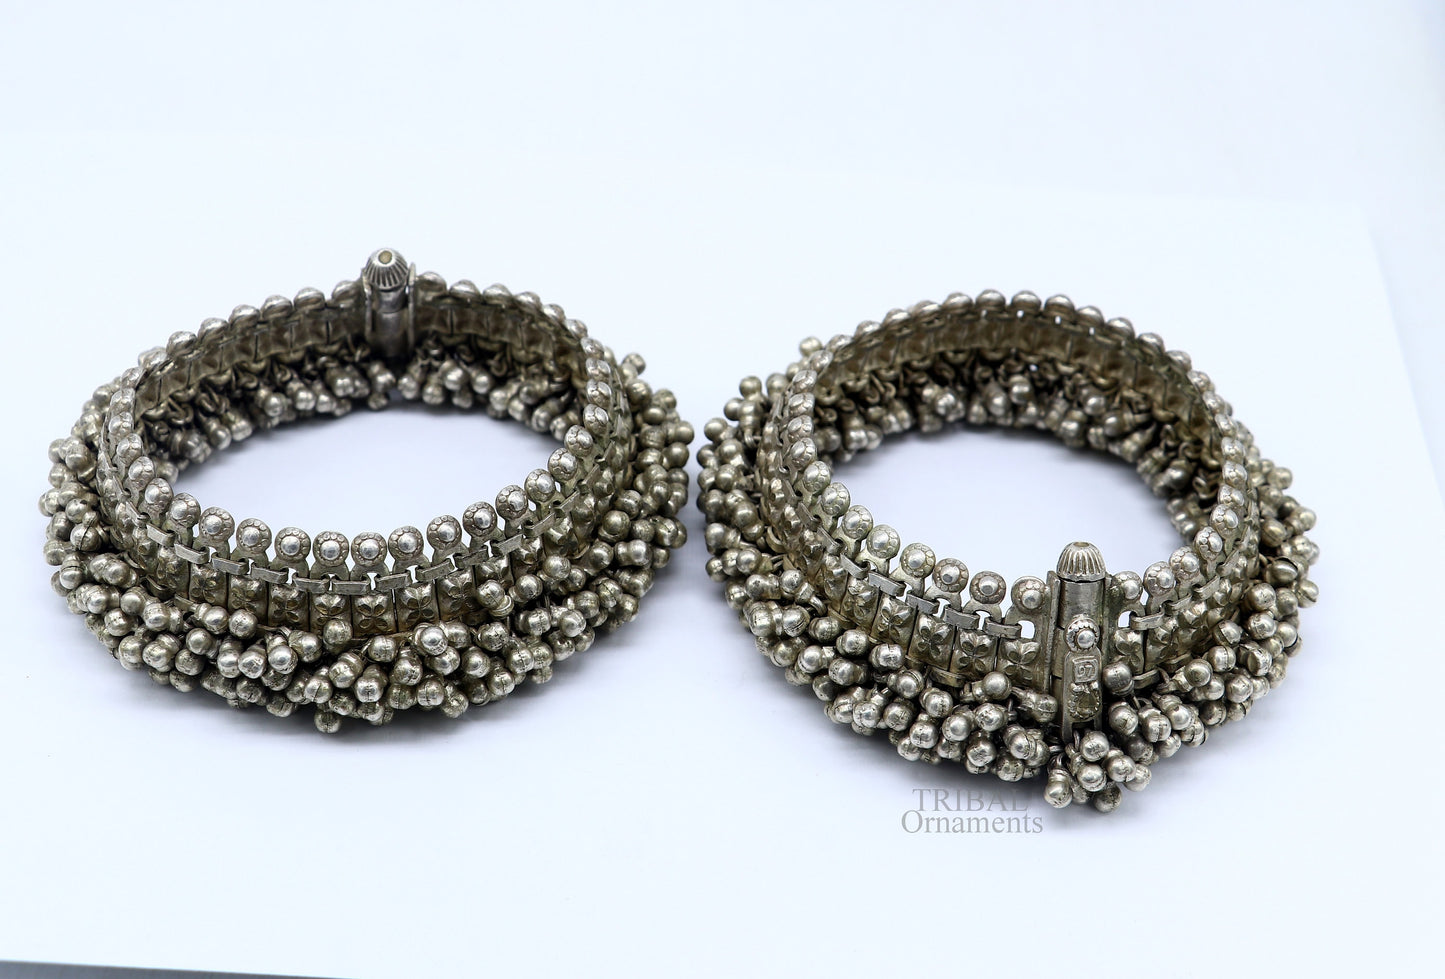 Vintage original antique silver handmade old anklets pair, ankle bracelet worn by Rajasthan tribal people, ethnic belly dance jewelry anko59 - TRIBAL ORNAMENTS